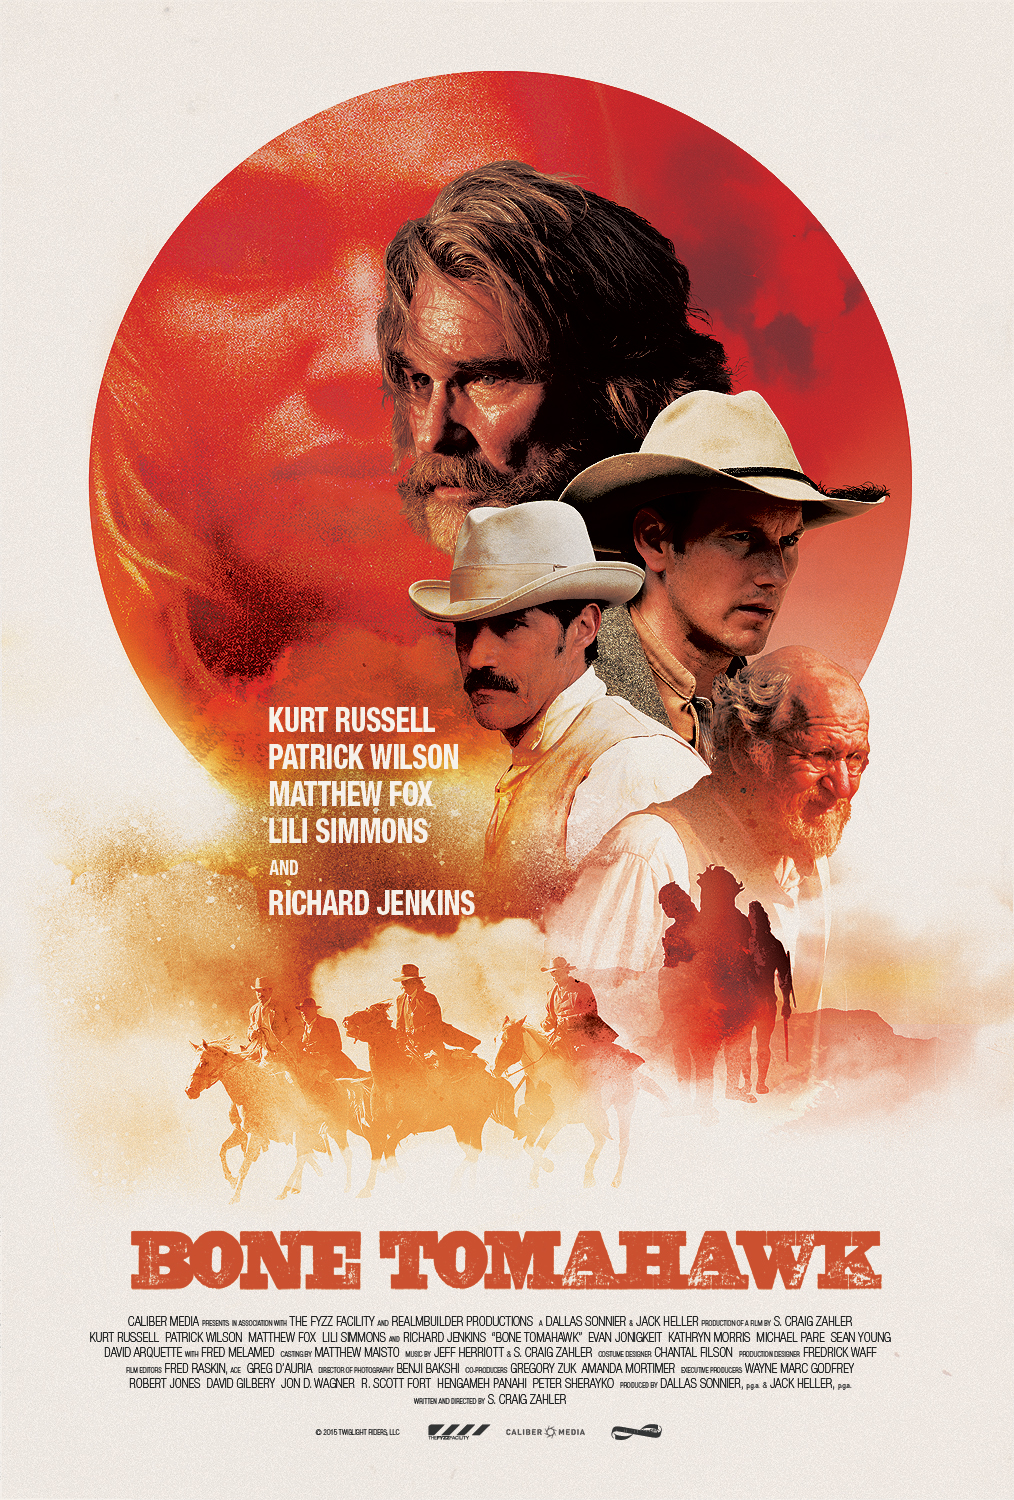 Bone Tomahawk' Poster Goes Classic Western - Bloody Disgusting